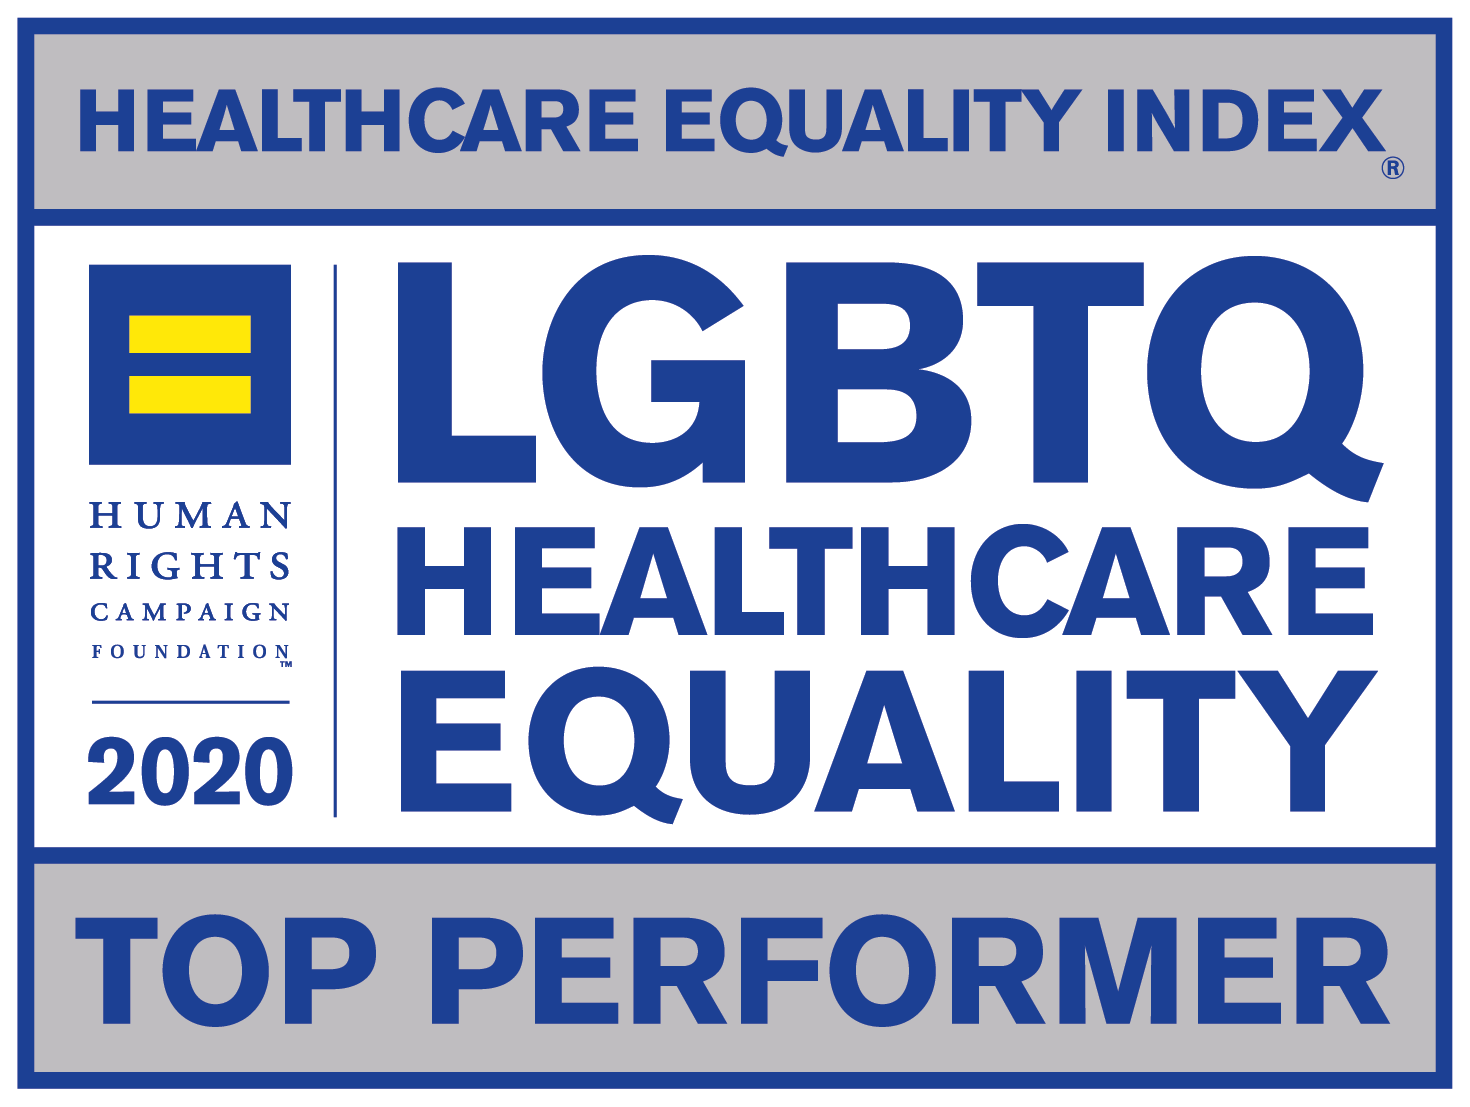 Healthcare Equality Index - LGBTQ Heathcare Equality - Top Performer 2020